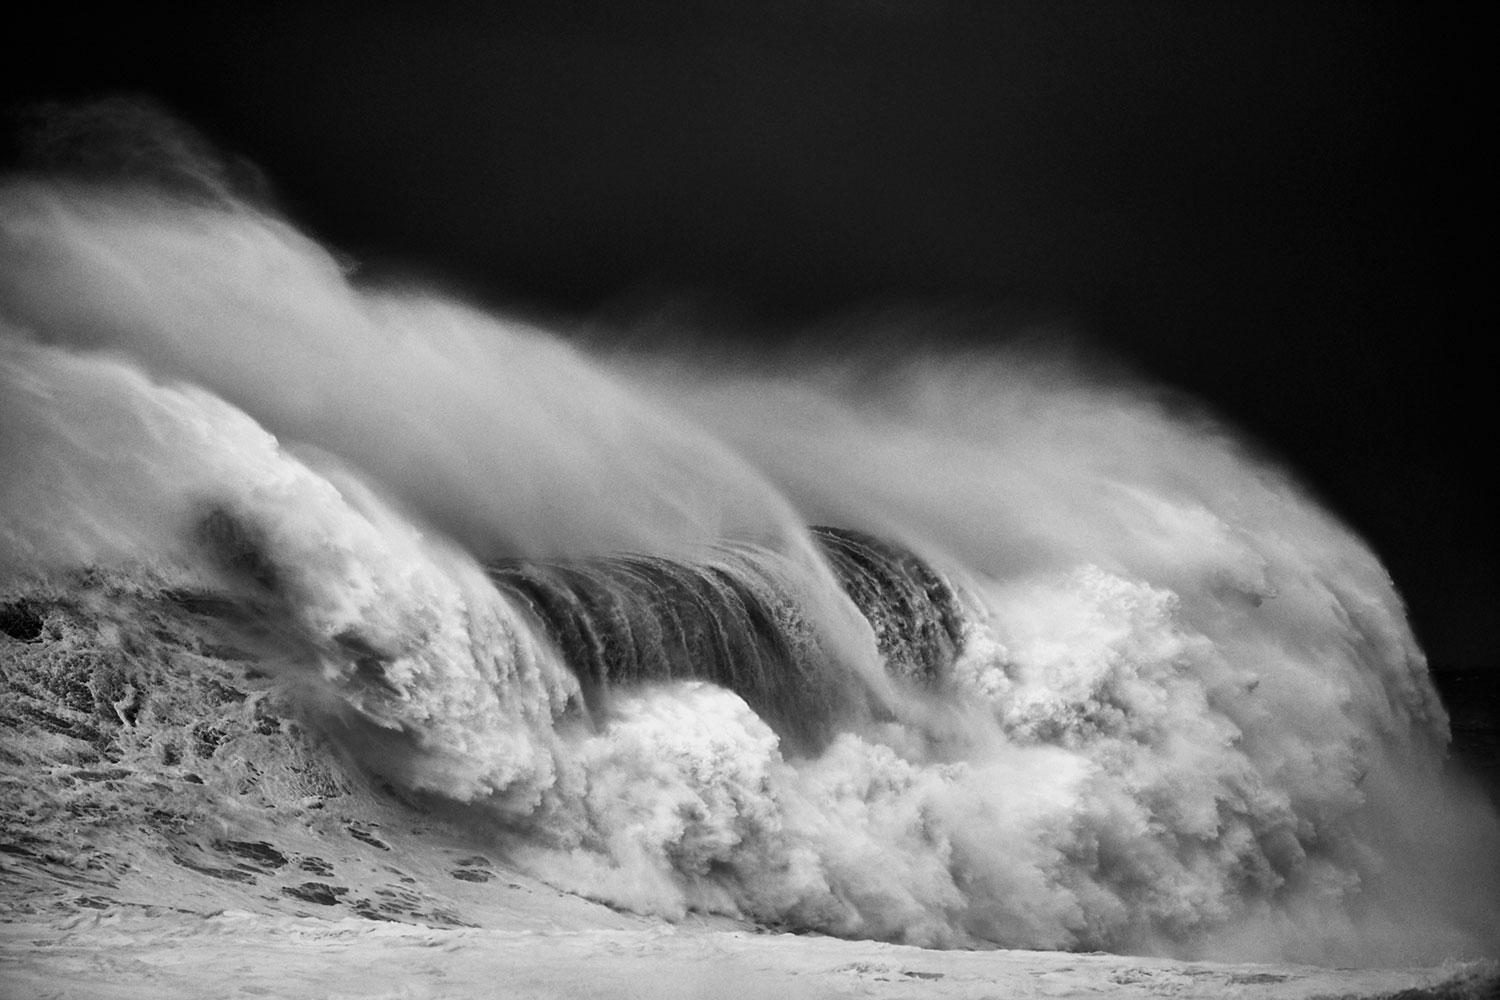 Alessandro Puccinelli Abstract Photograph - Nazare, Portugal, Waves, Seascape Photography (LARGE FORMAT)